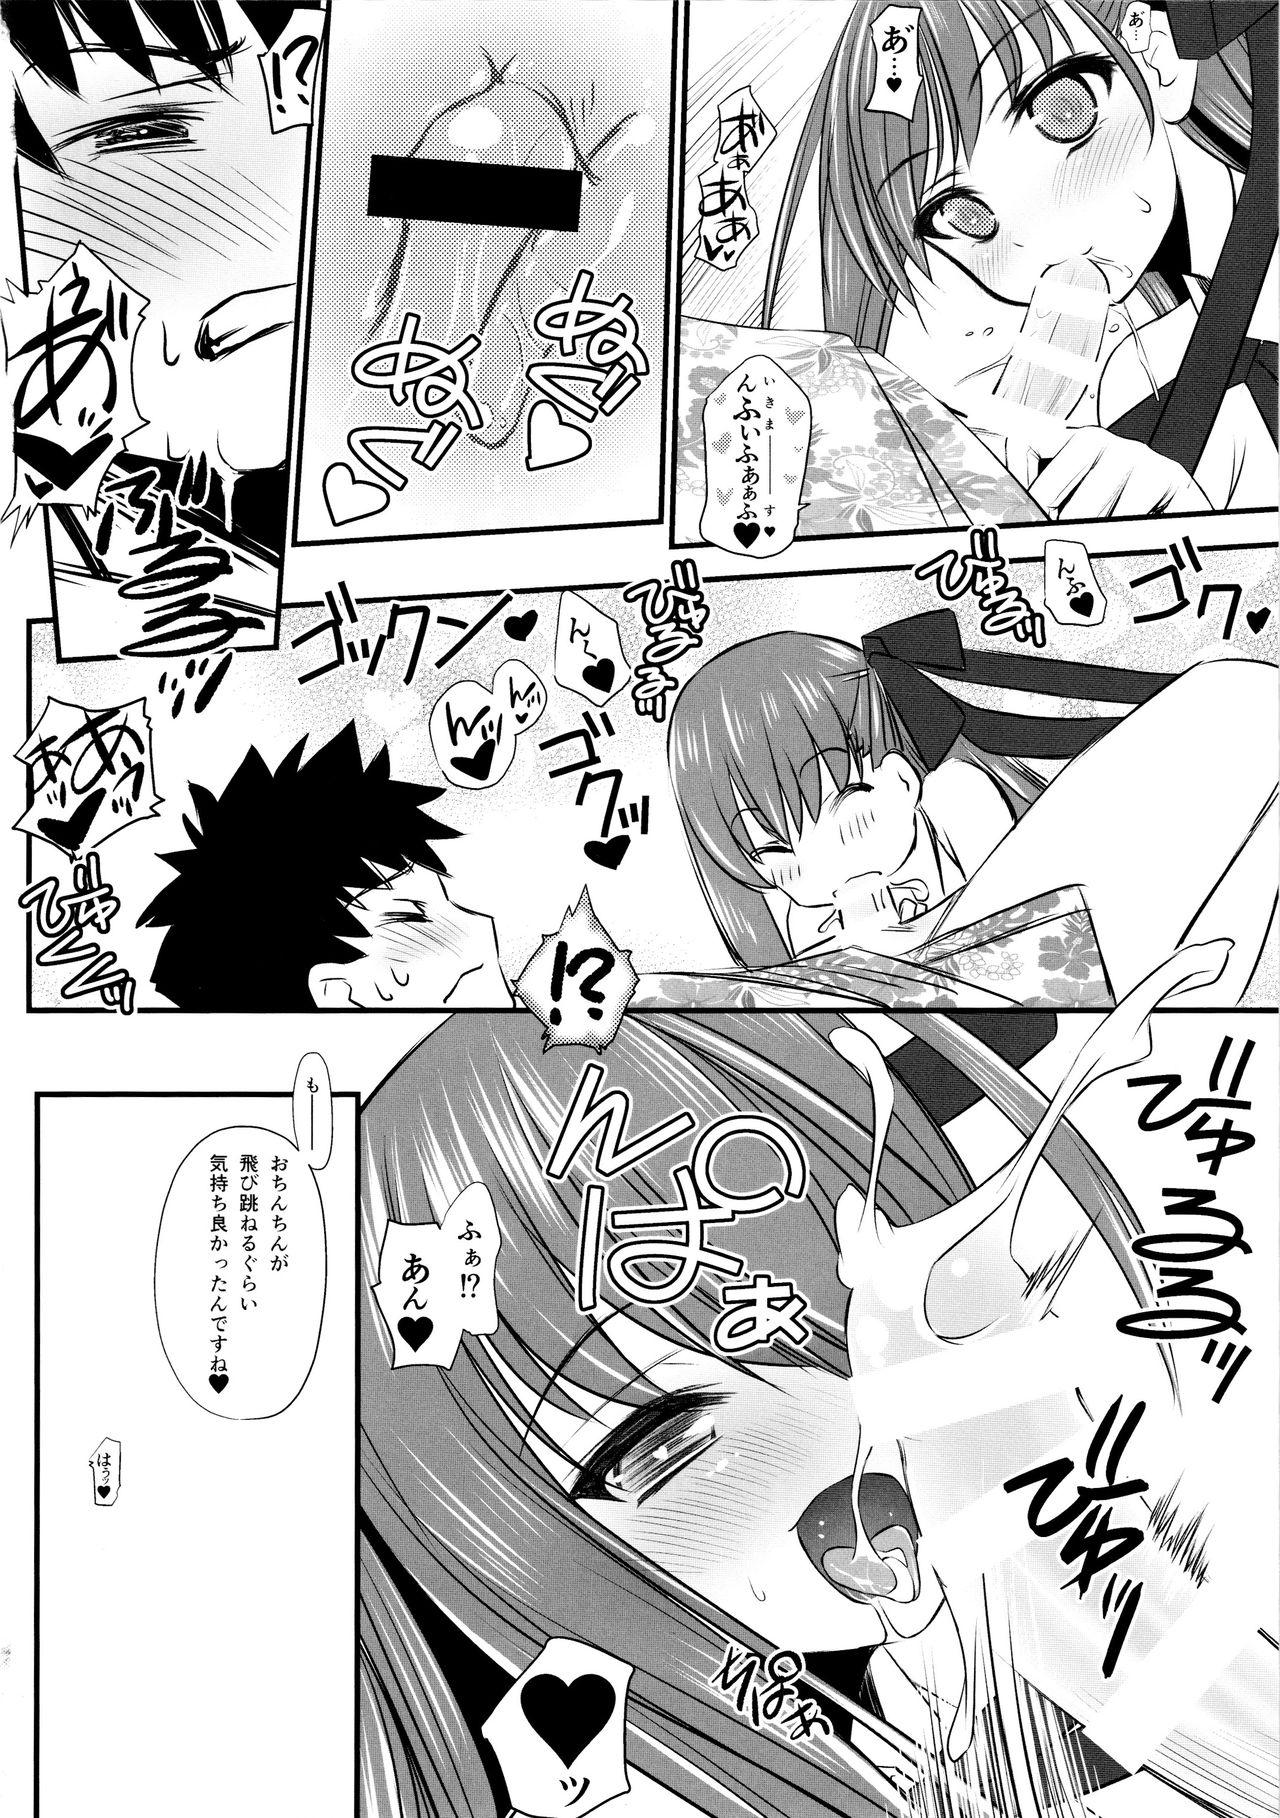 Breast (C96) [Yakan Honpo (Inoue Tommy)] Queen [Kyuuin] BB-chan (Fate/Grand Order) - Fate grand order Butt Fuck - Page 6